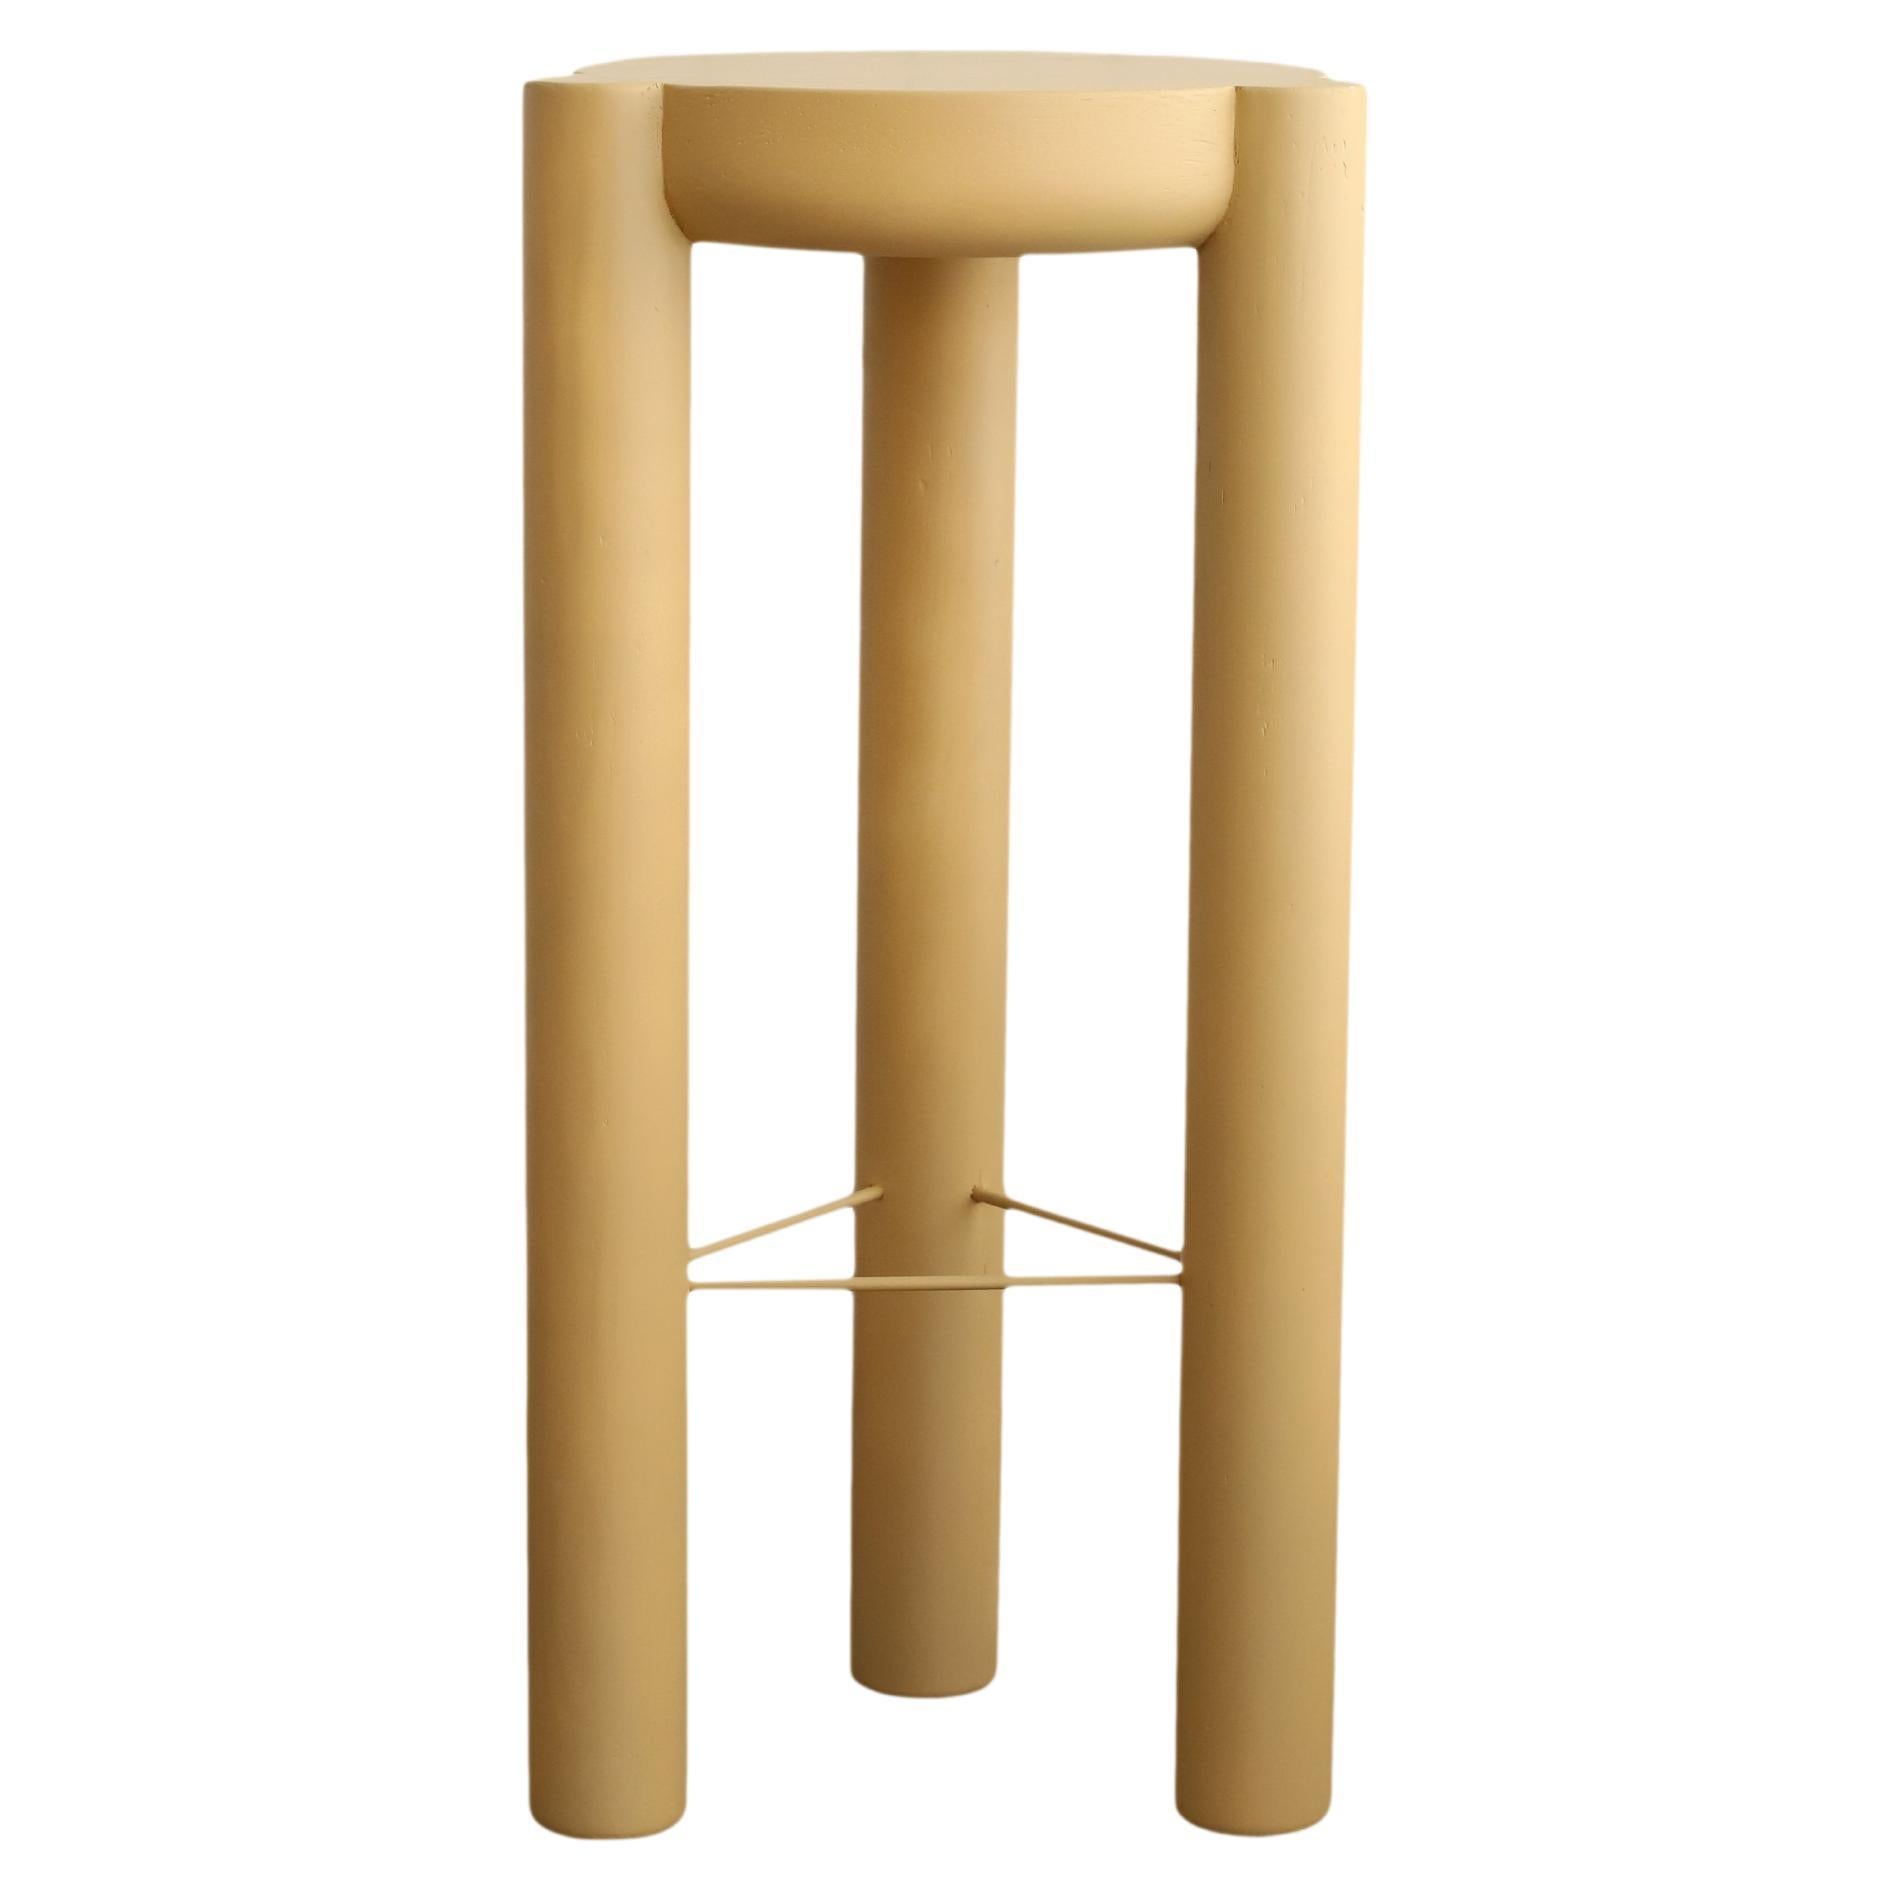 Pillar Bar Stool 3 Legged Wood and Lacquered - Beige For Sale